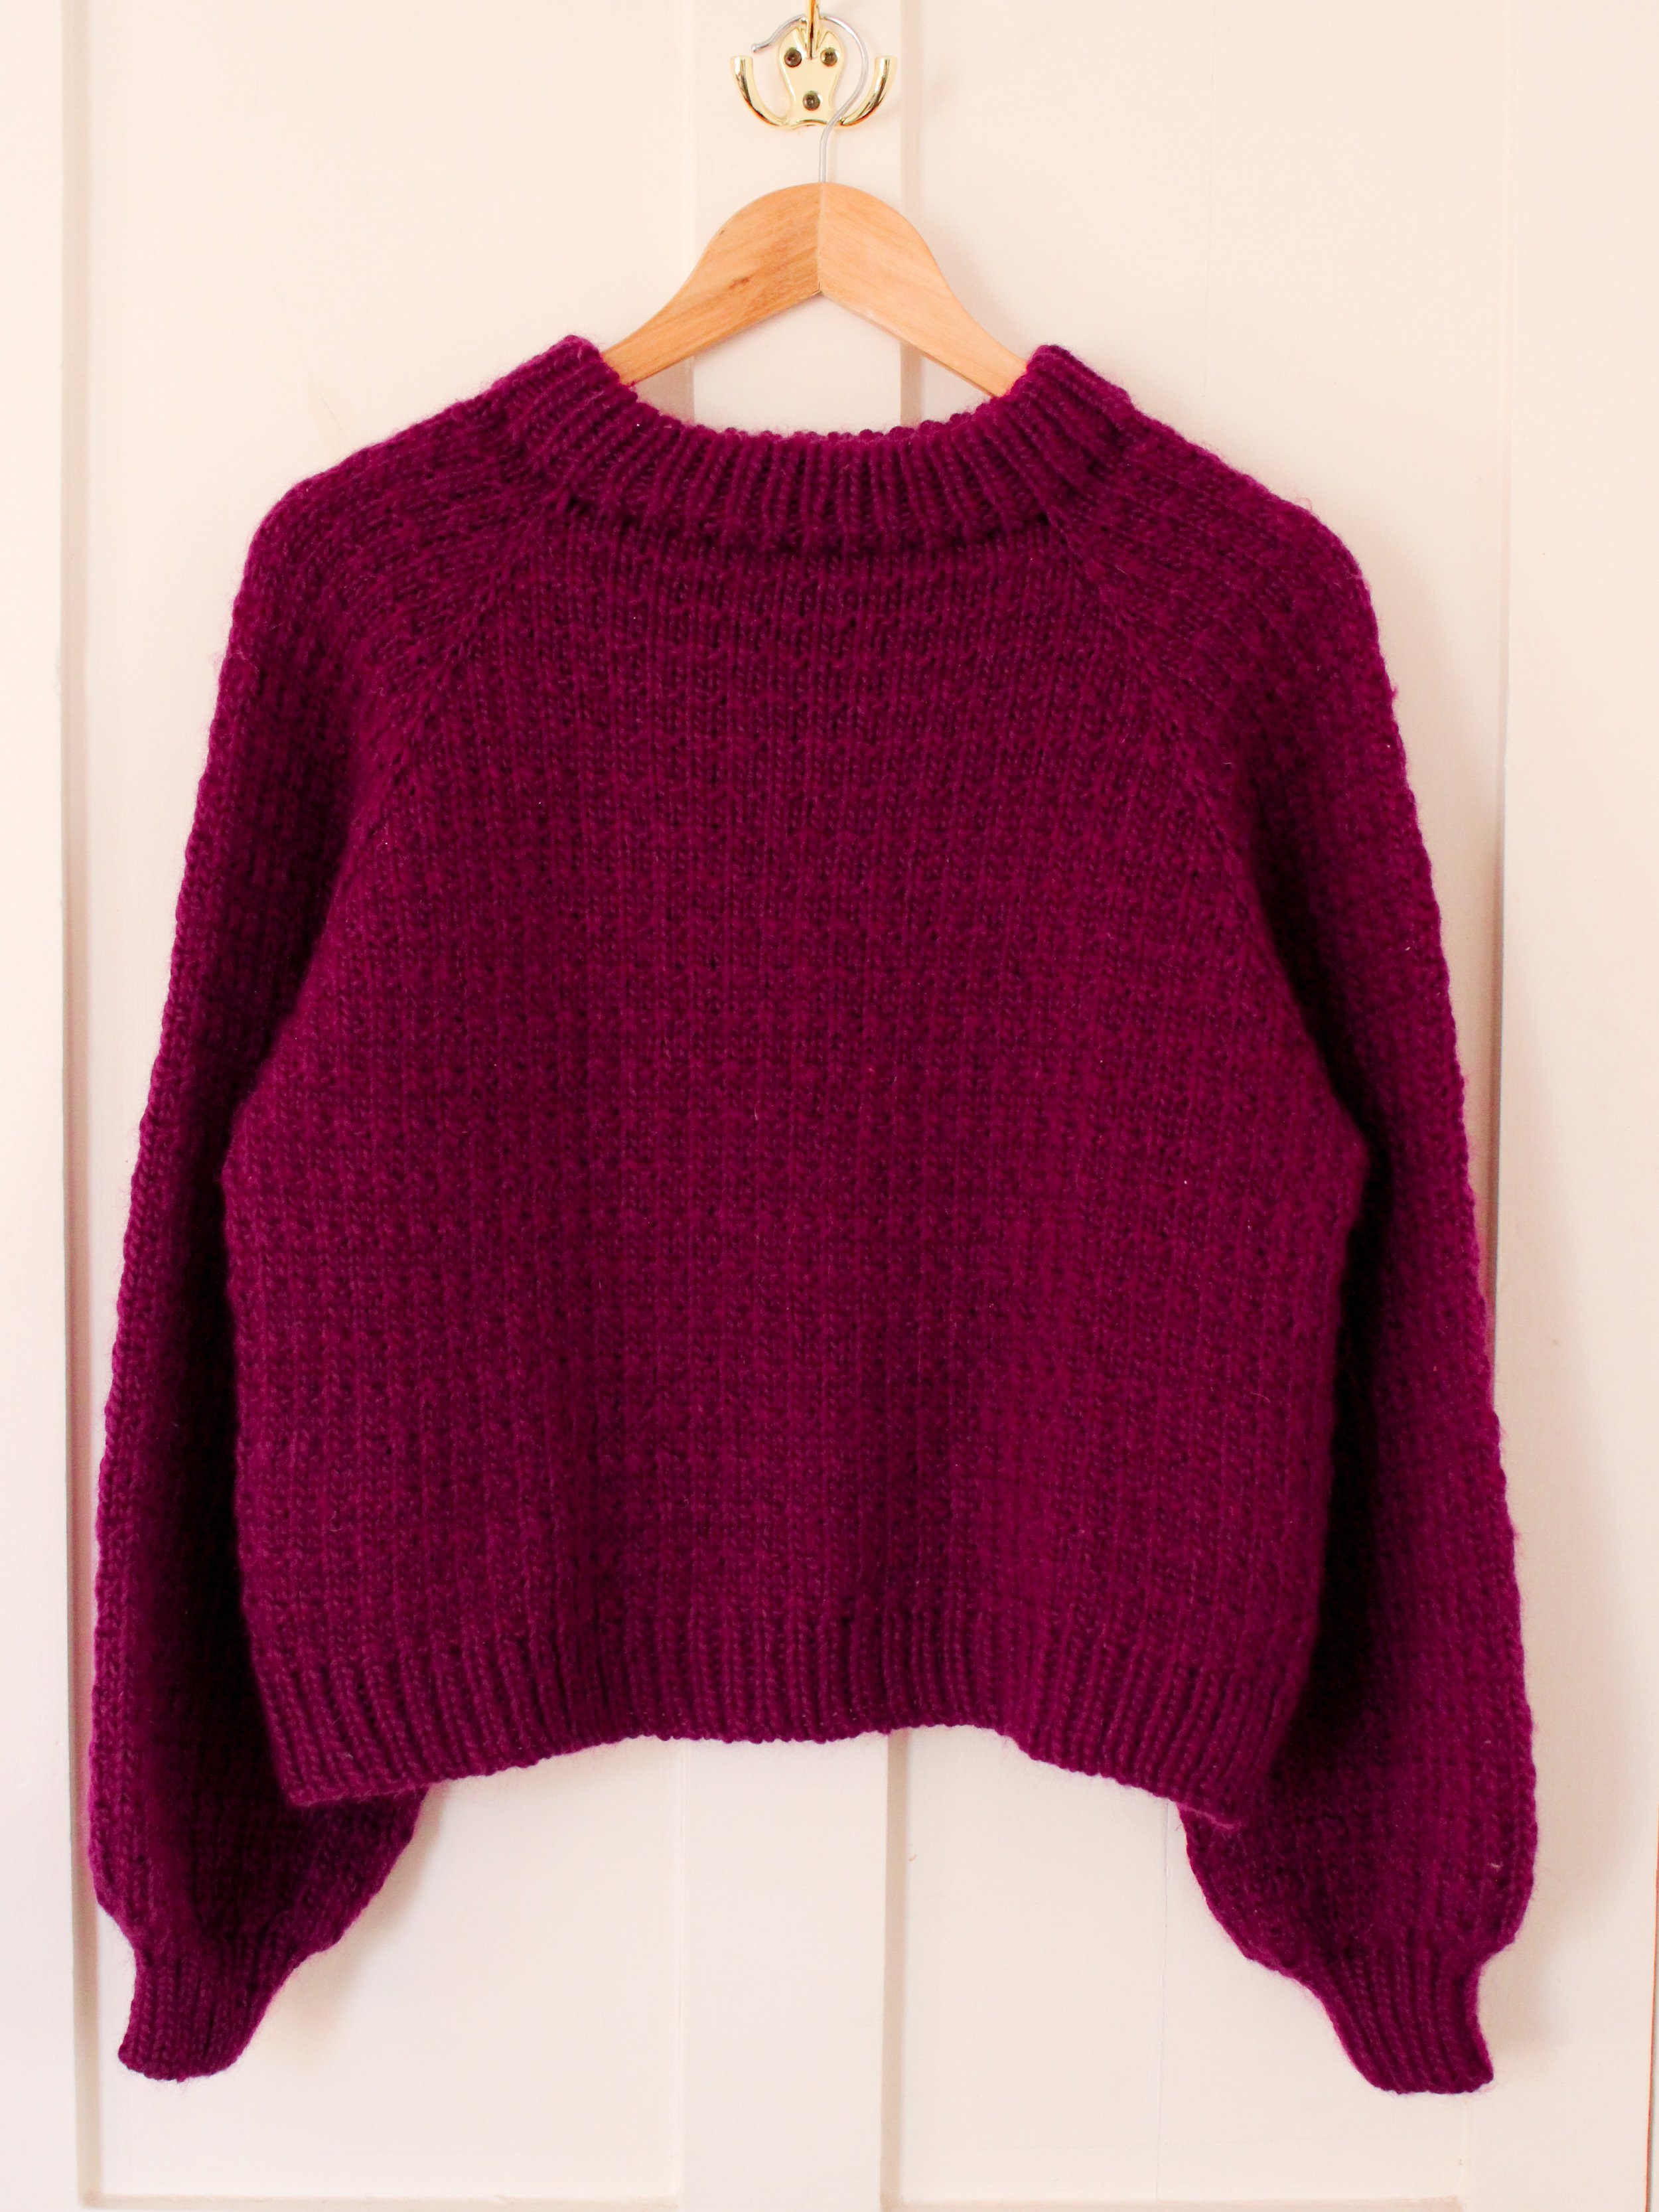 Aosta Sweater (3.0) — The Knit Purl Girl